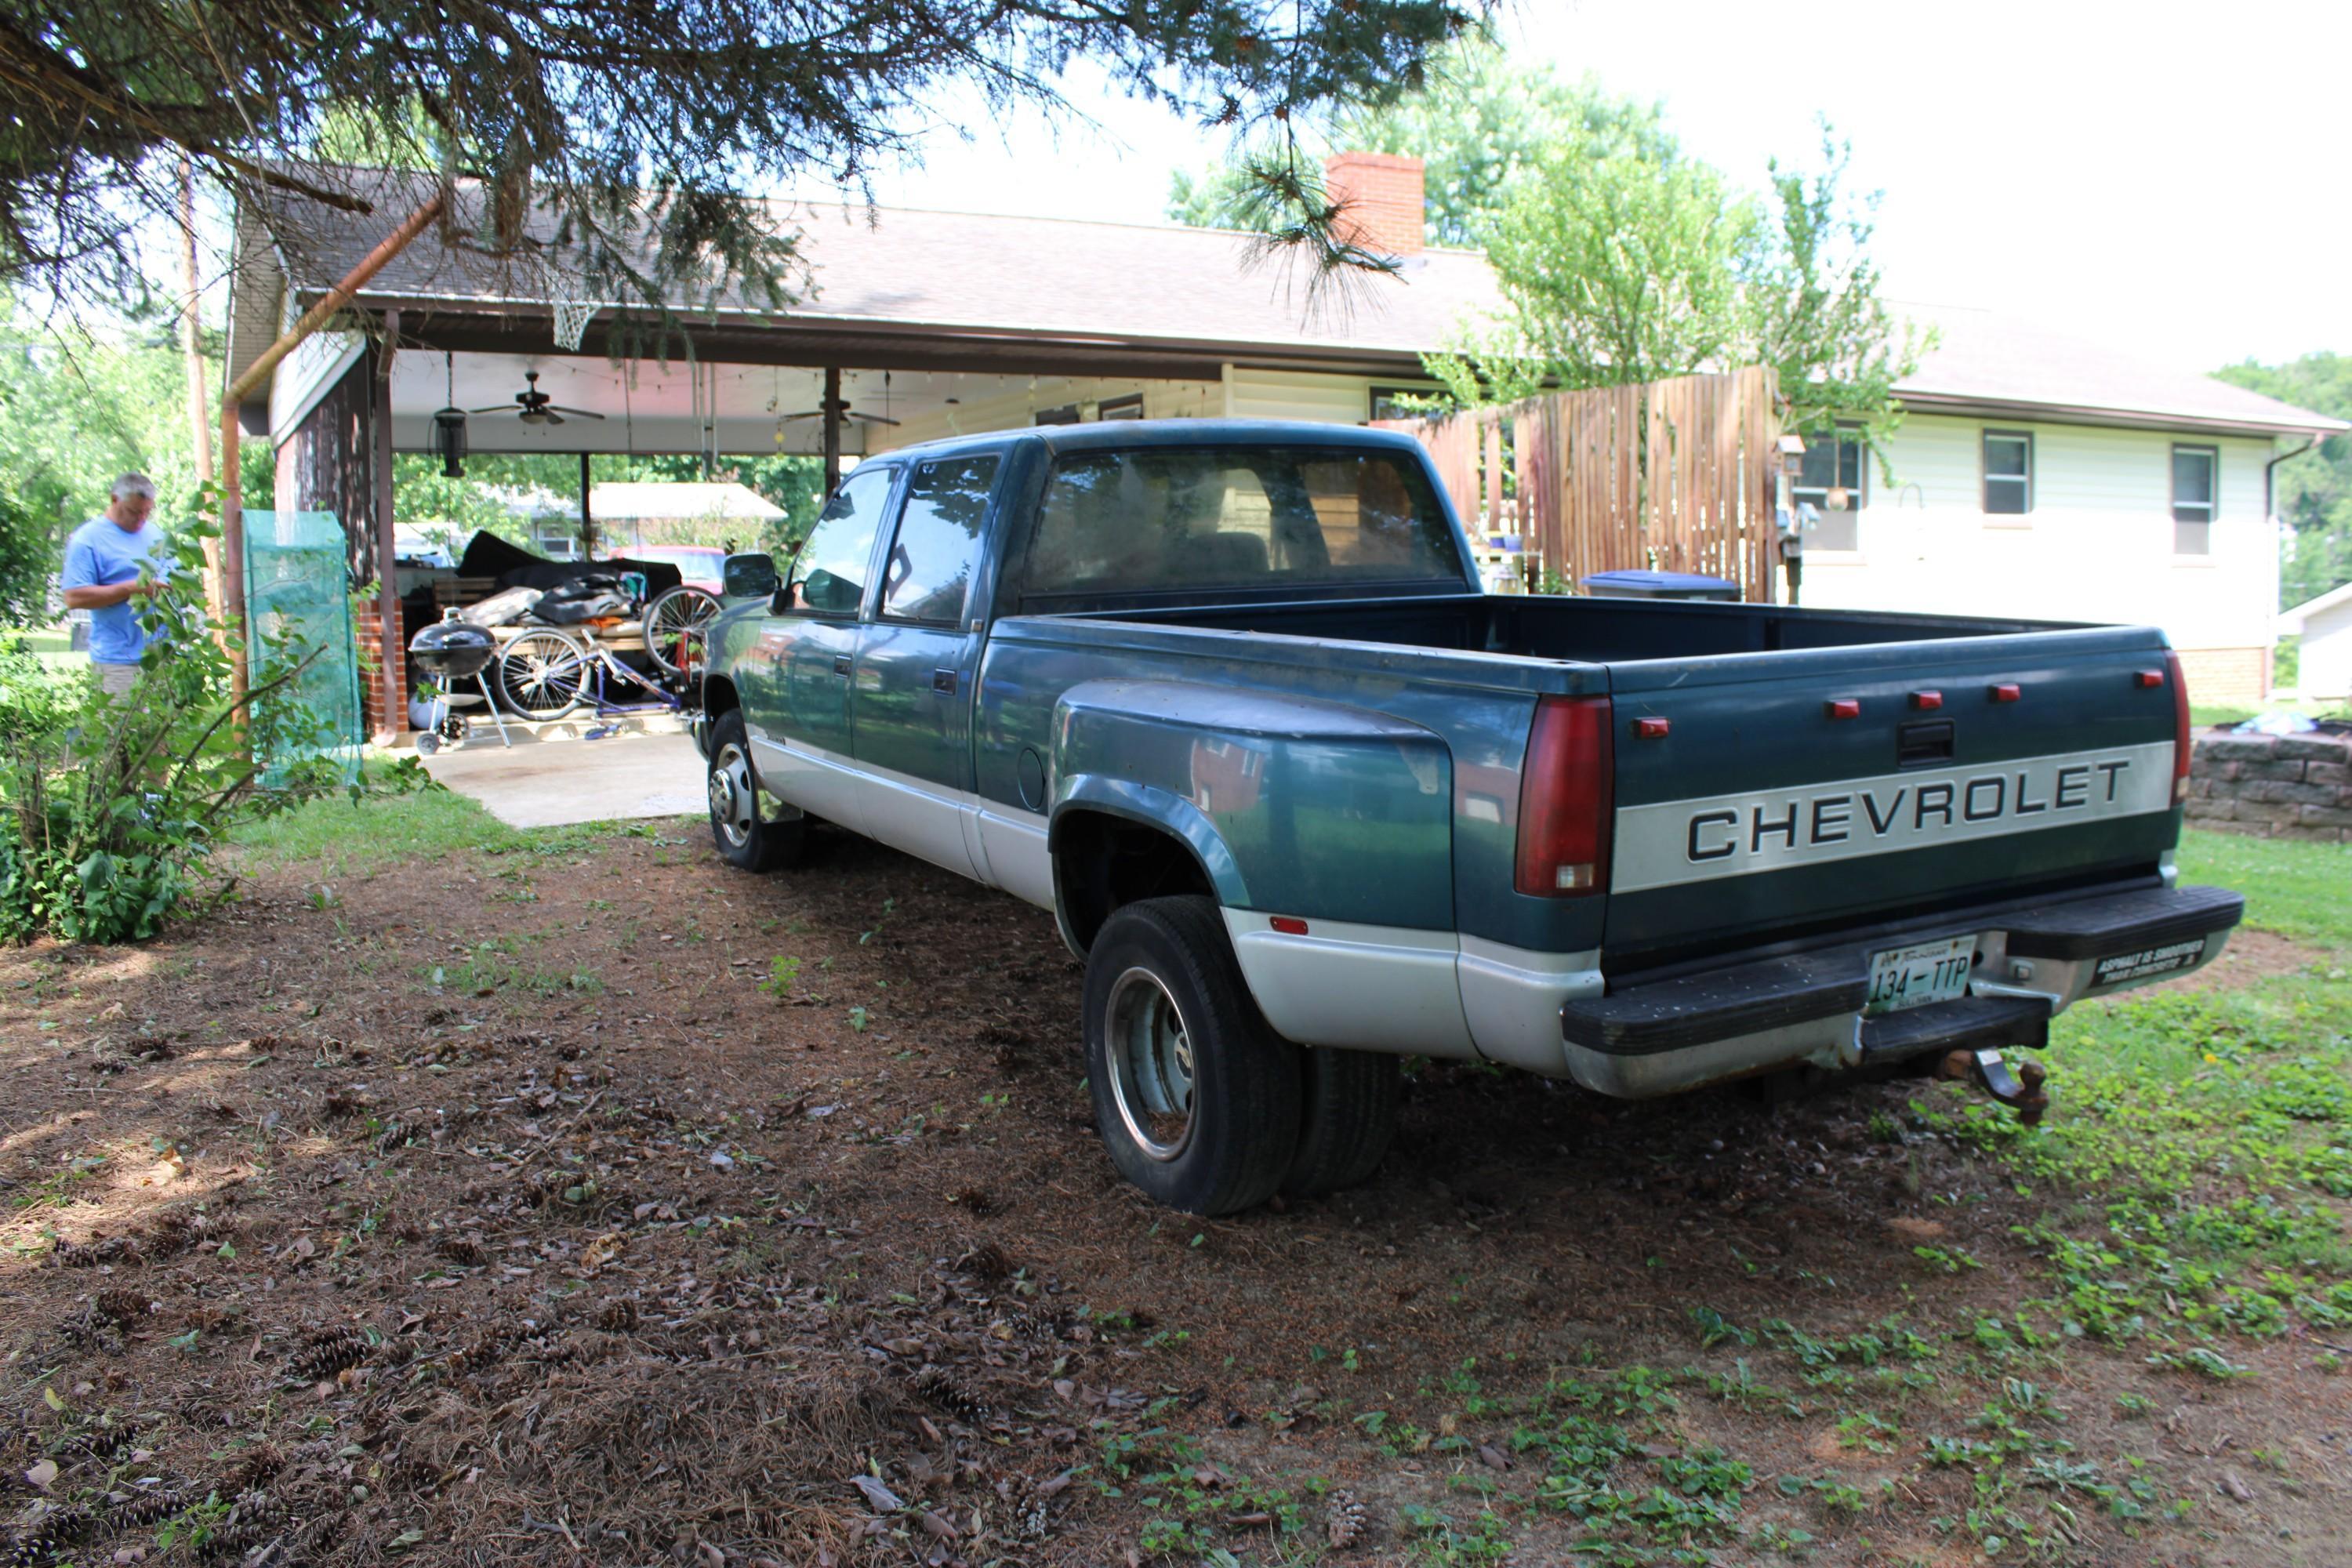 1993 Chevy 3500 Dually, 4 Door Truck, Automatic Trans w/ 114,519 Miles